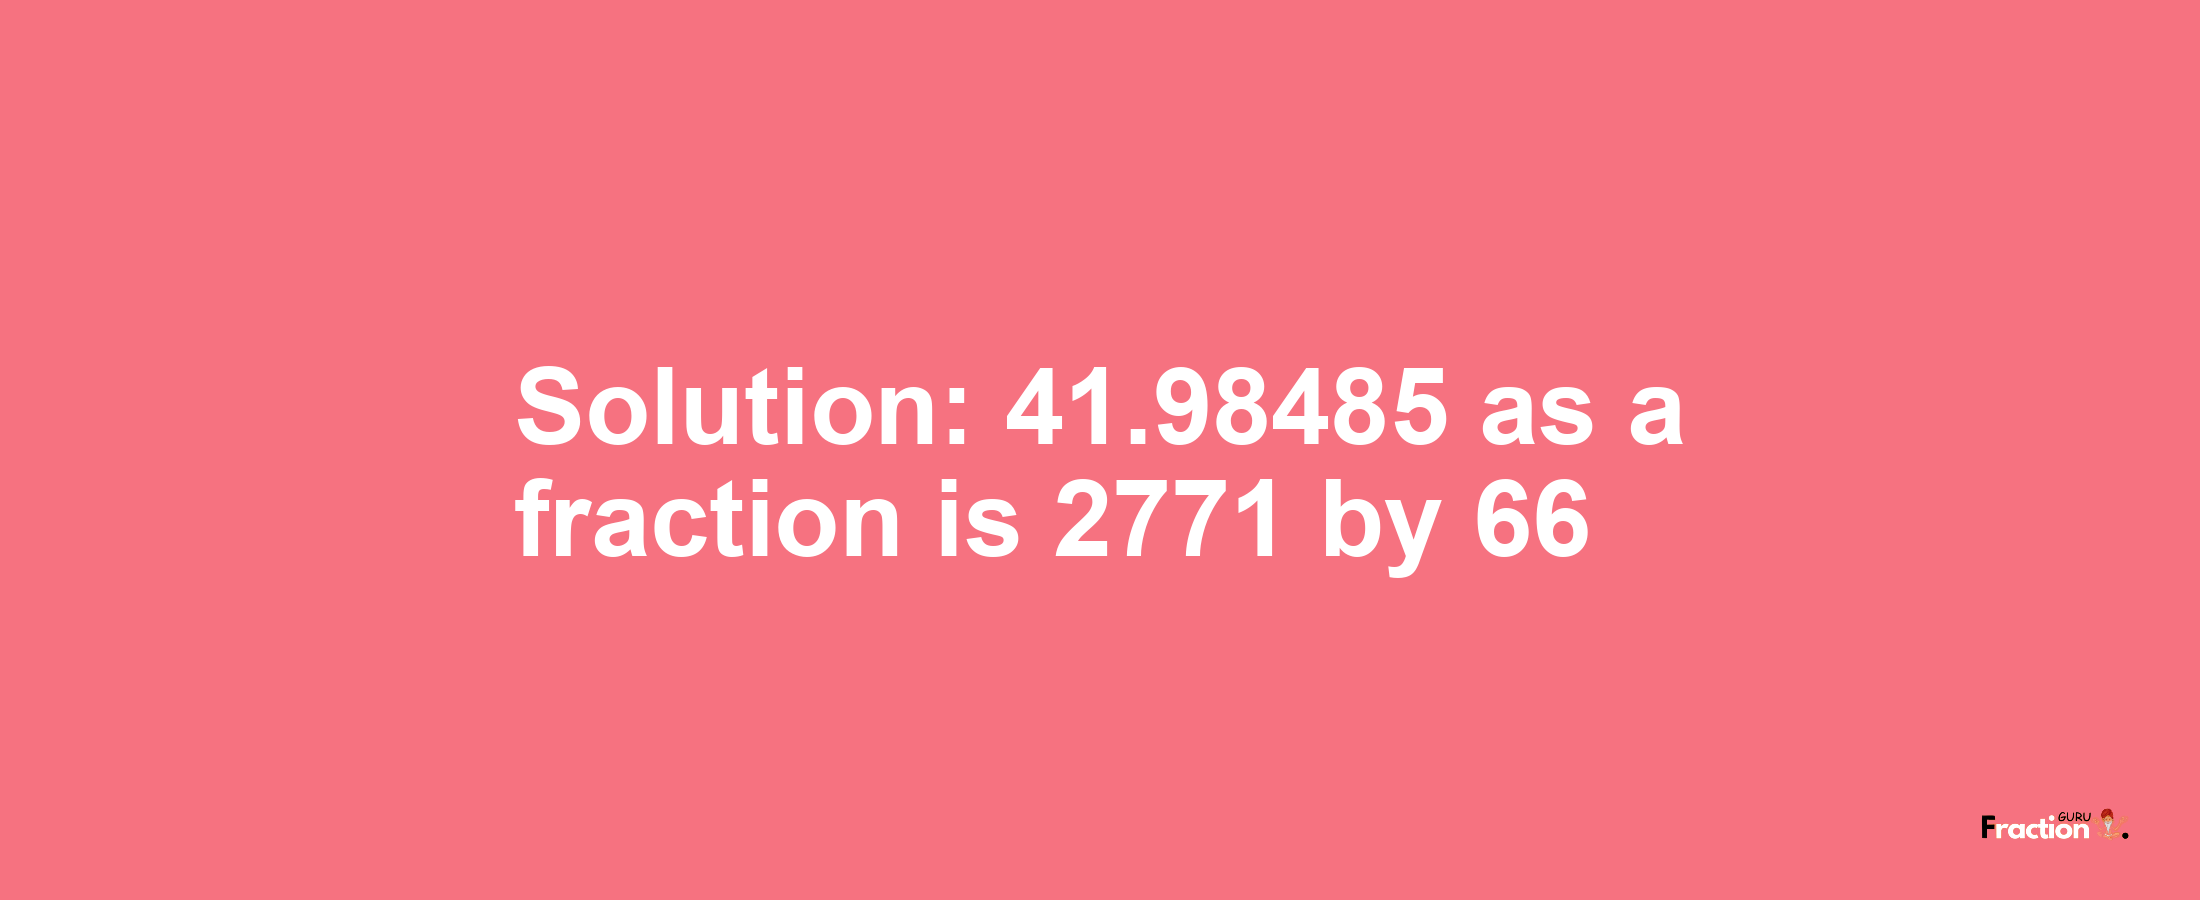 Solution:41.98485 as a fraction is 2771/66